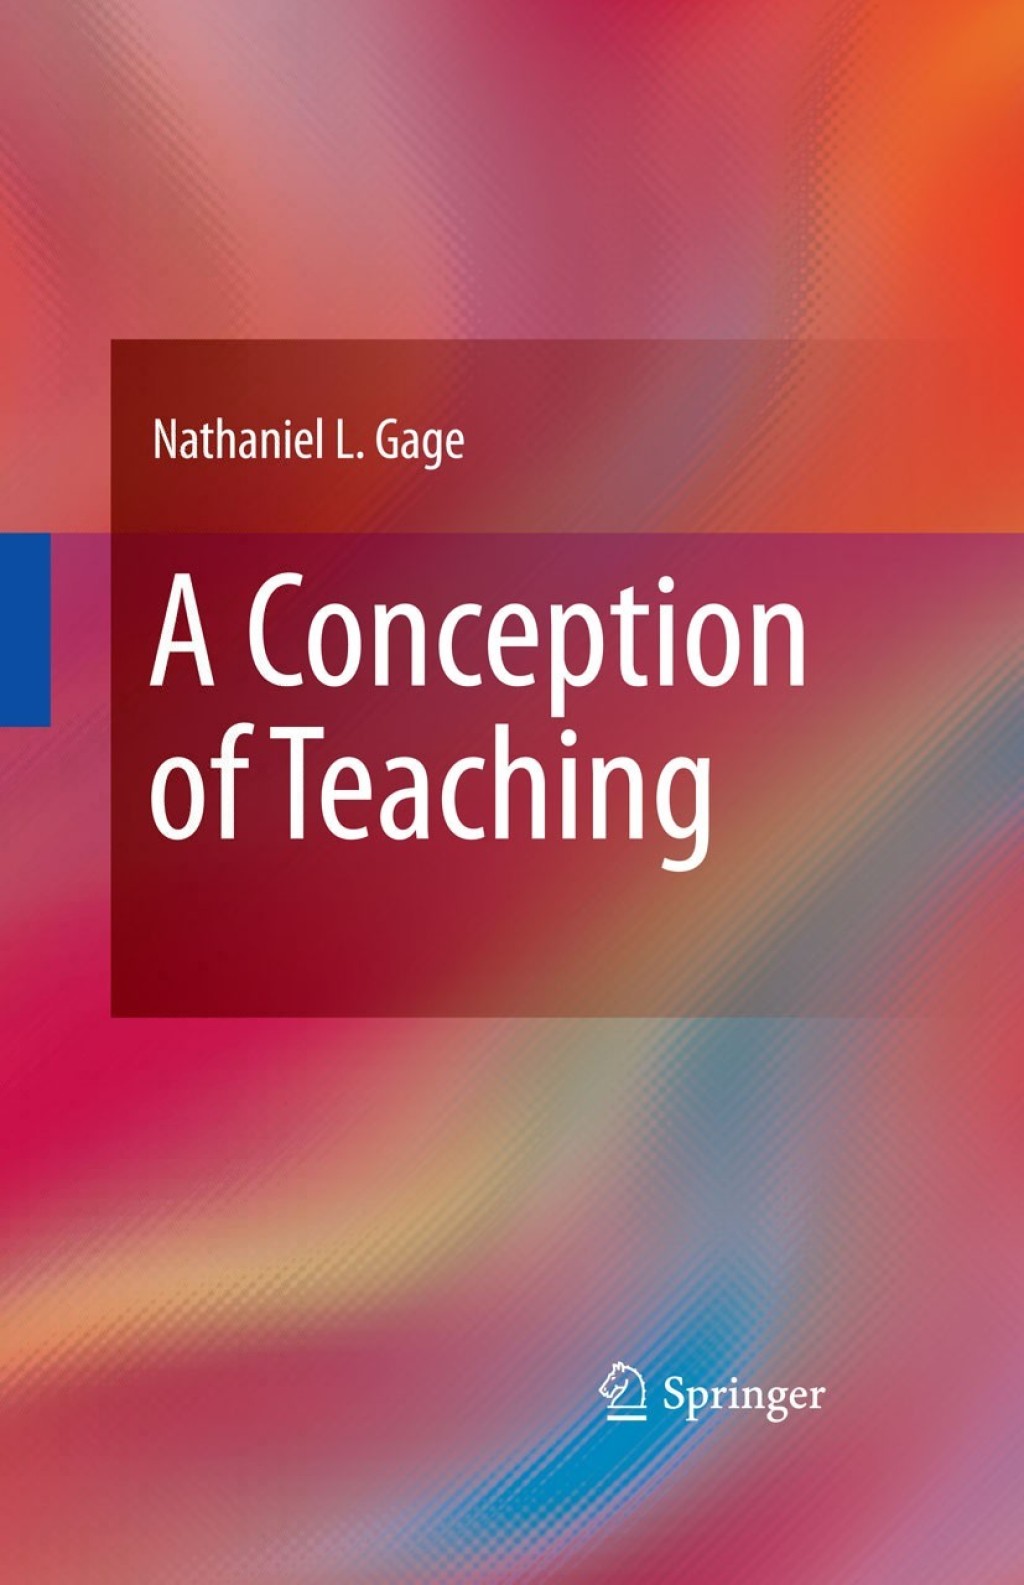 A Conception of Teaching (eBook Rental) - Nathaniel L. Gage,